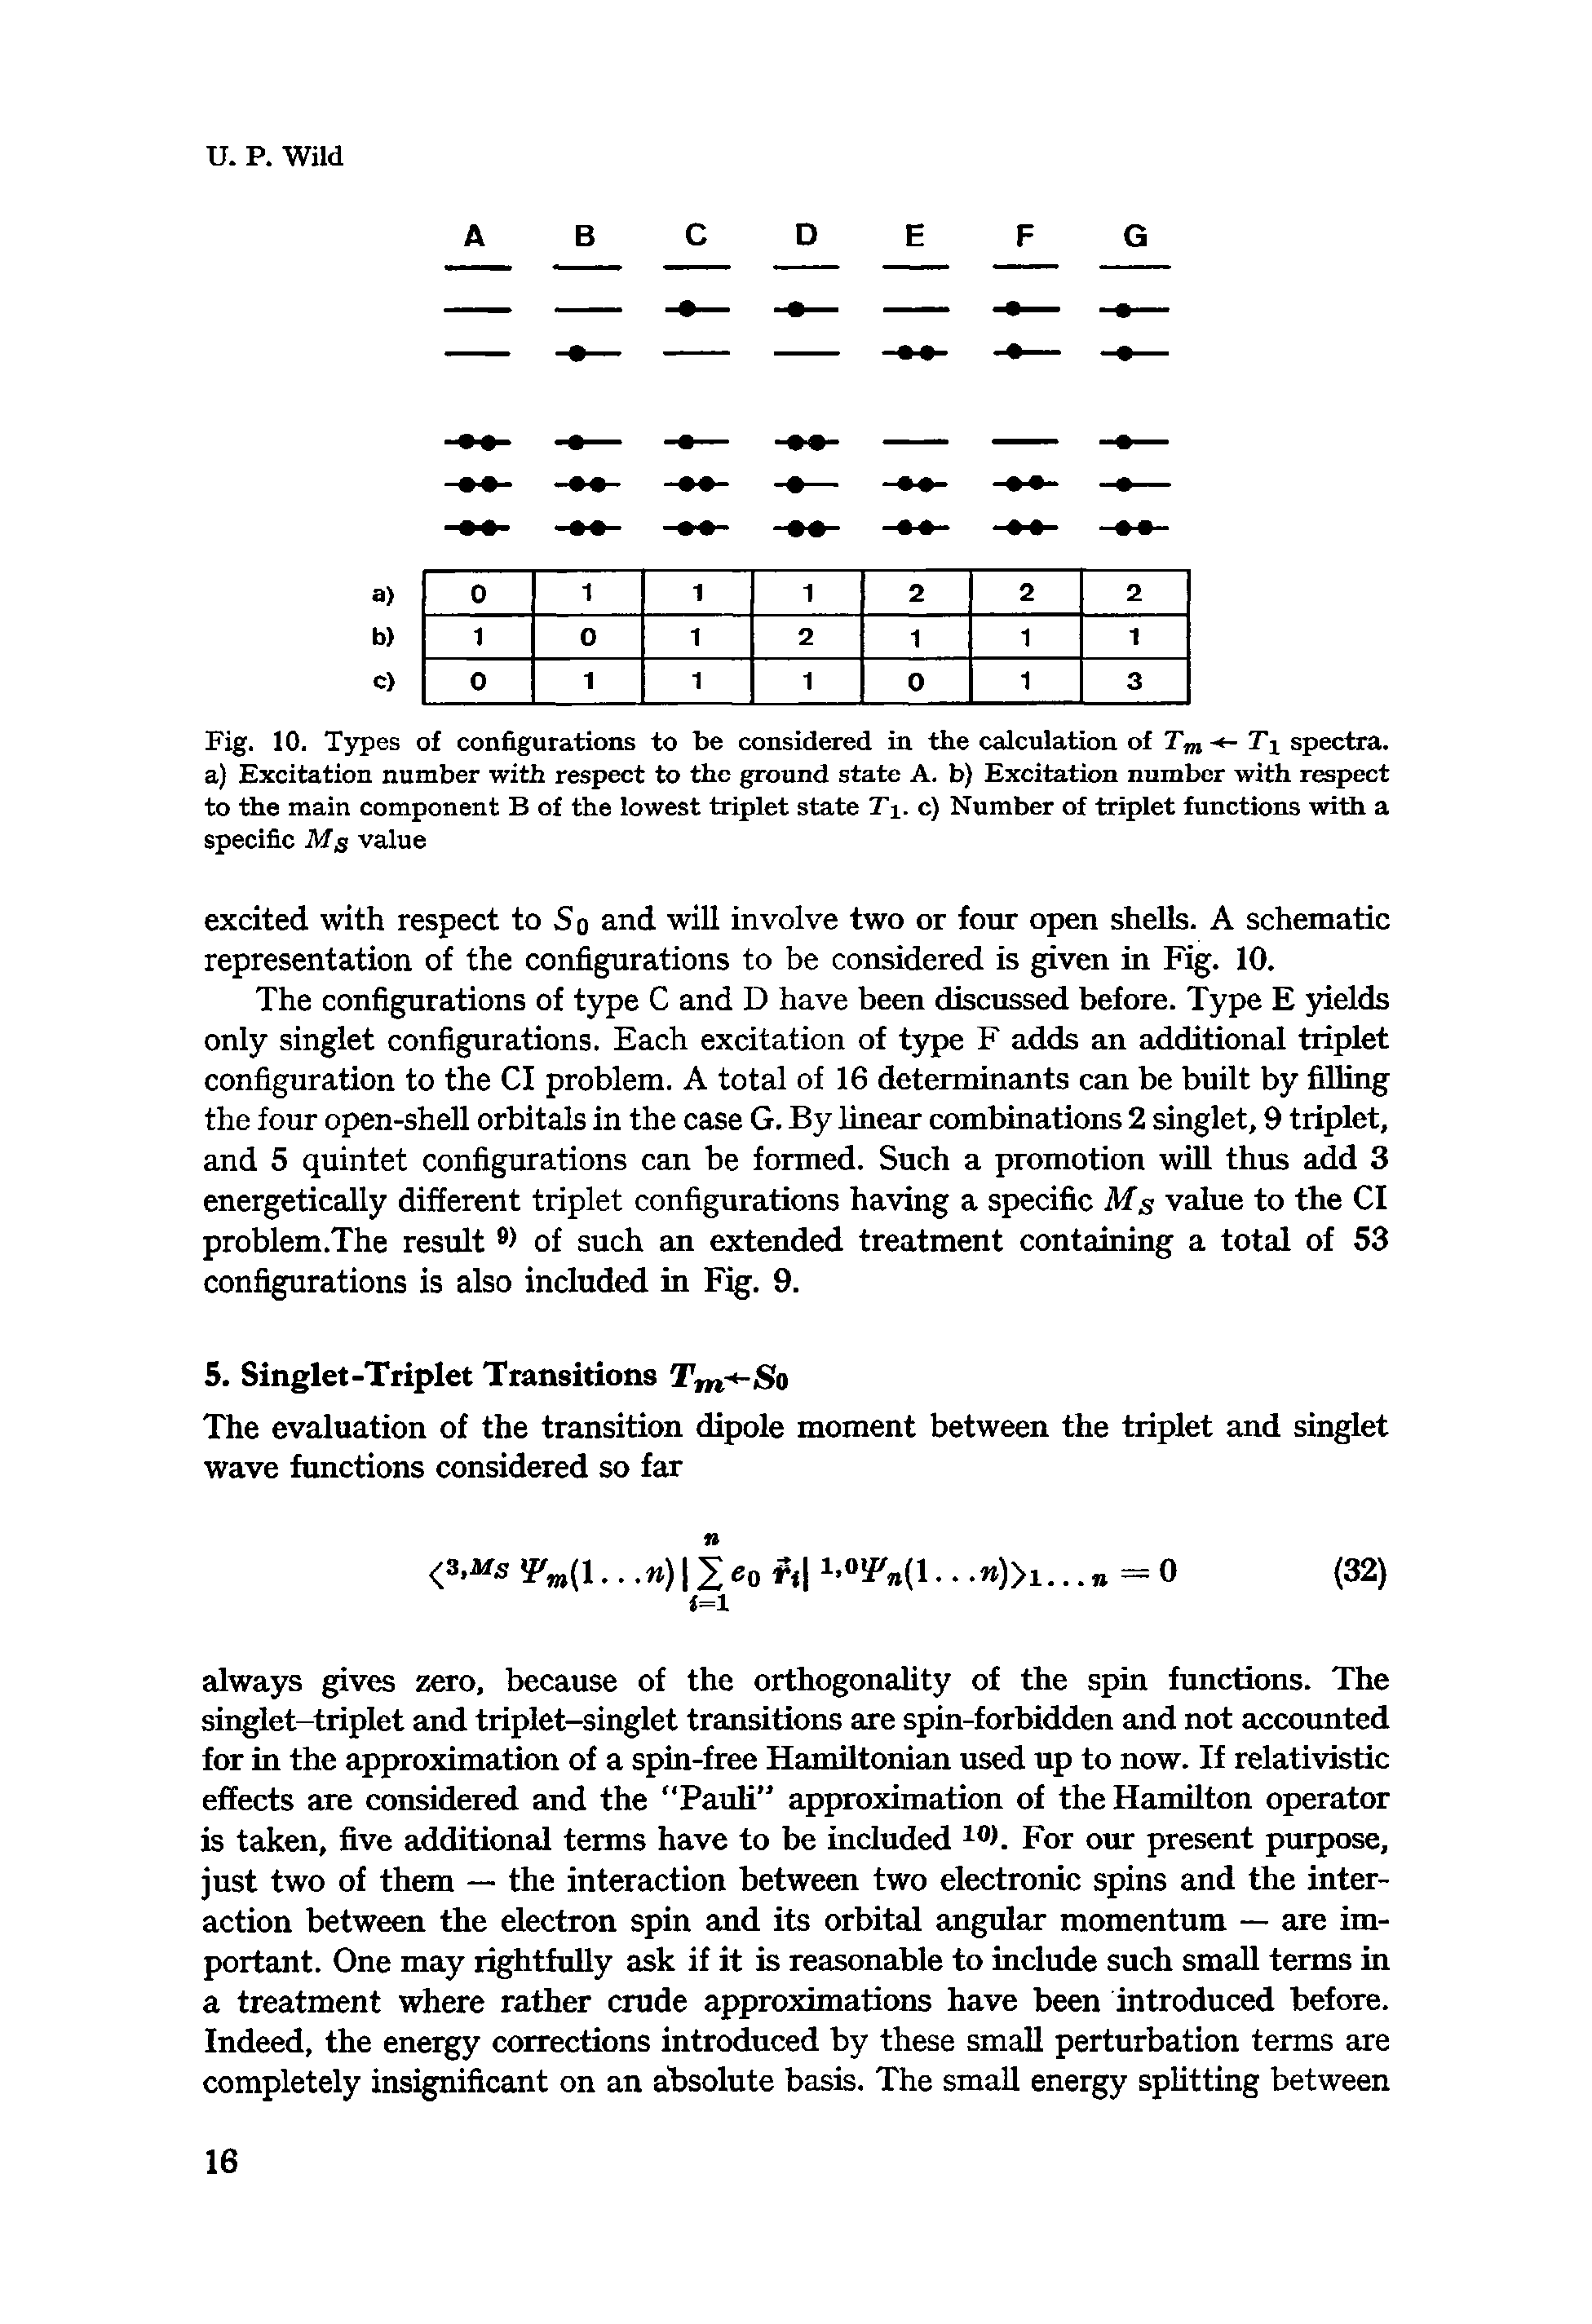 Fig. 10. Types of configurations to be considered in the calculation of Tm - T spectra, a) Excitation number with respect to the ground state A. b) Excitation number with respect to the main component B of the lowest triplet state Ti. c) Number of triplet functions with a specific Ms value...